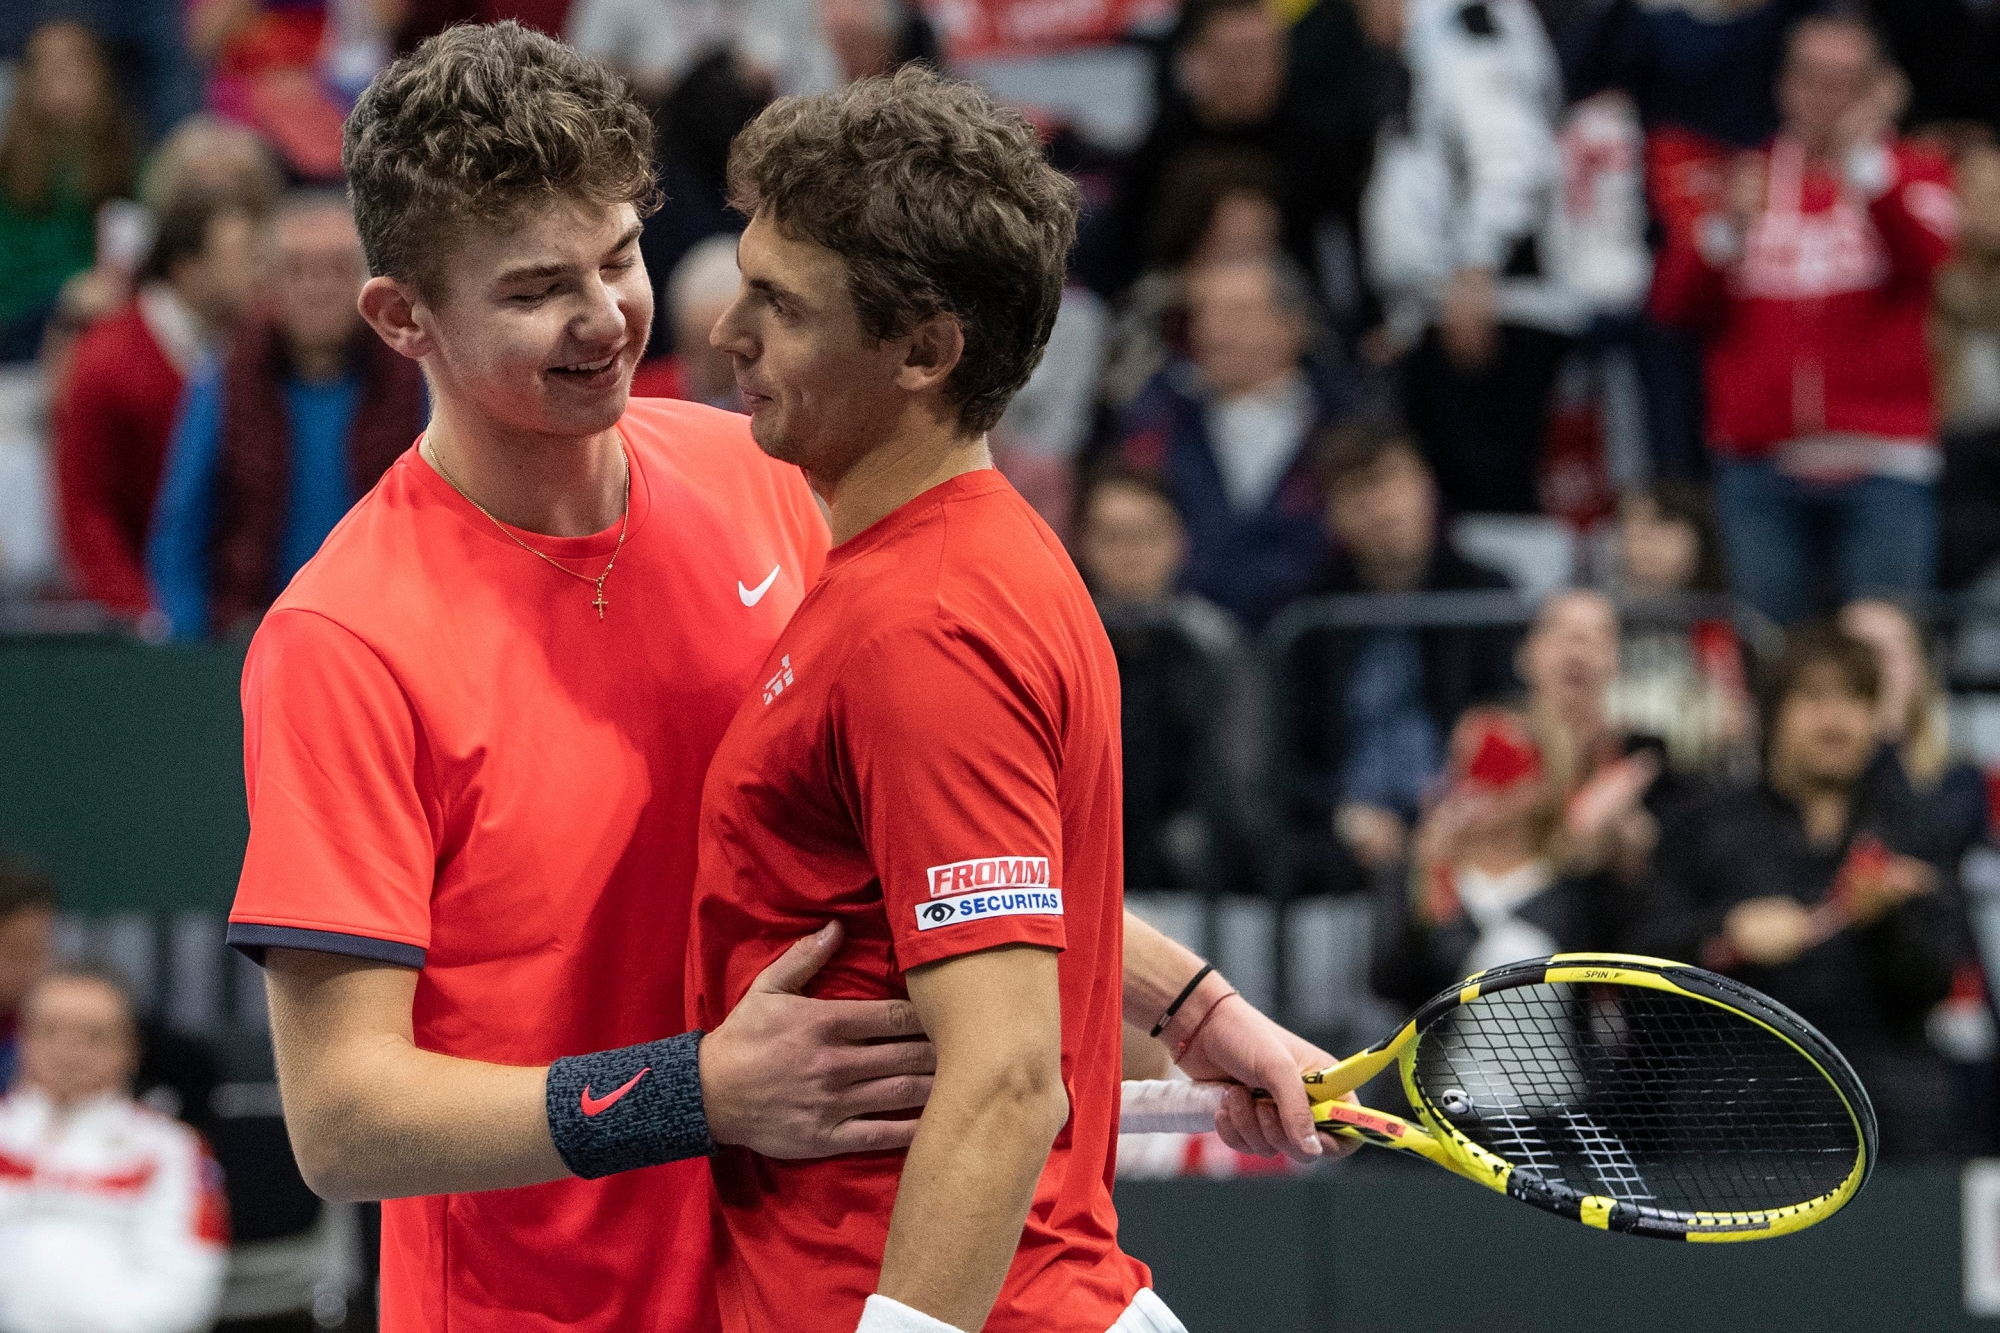 Switzerland's Henri Laaksonen, right, and Jerome Kym celebrate their victory after winning against Russia's Evgeny Donskoy, and Andrey Rublev during the double match of the Davis Cup qualification final round between Switzerland and Russia at the Swiss Tennis Arena in Biel, Switzerland, on Saturday, February 2, 2019. (KEYSTONE/Peter Schneider) SWITZERLAND TENNIS DAVIS CUP